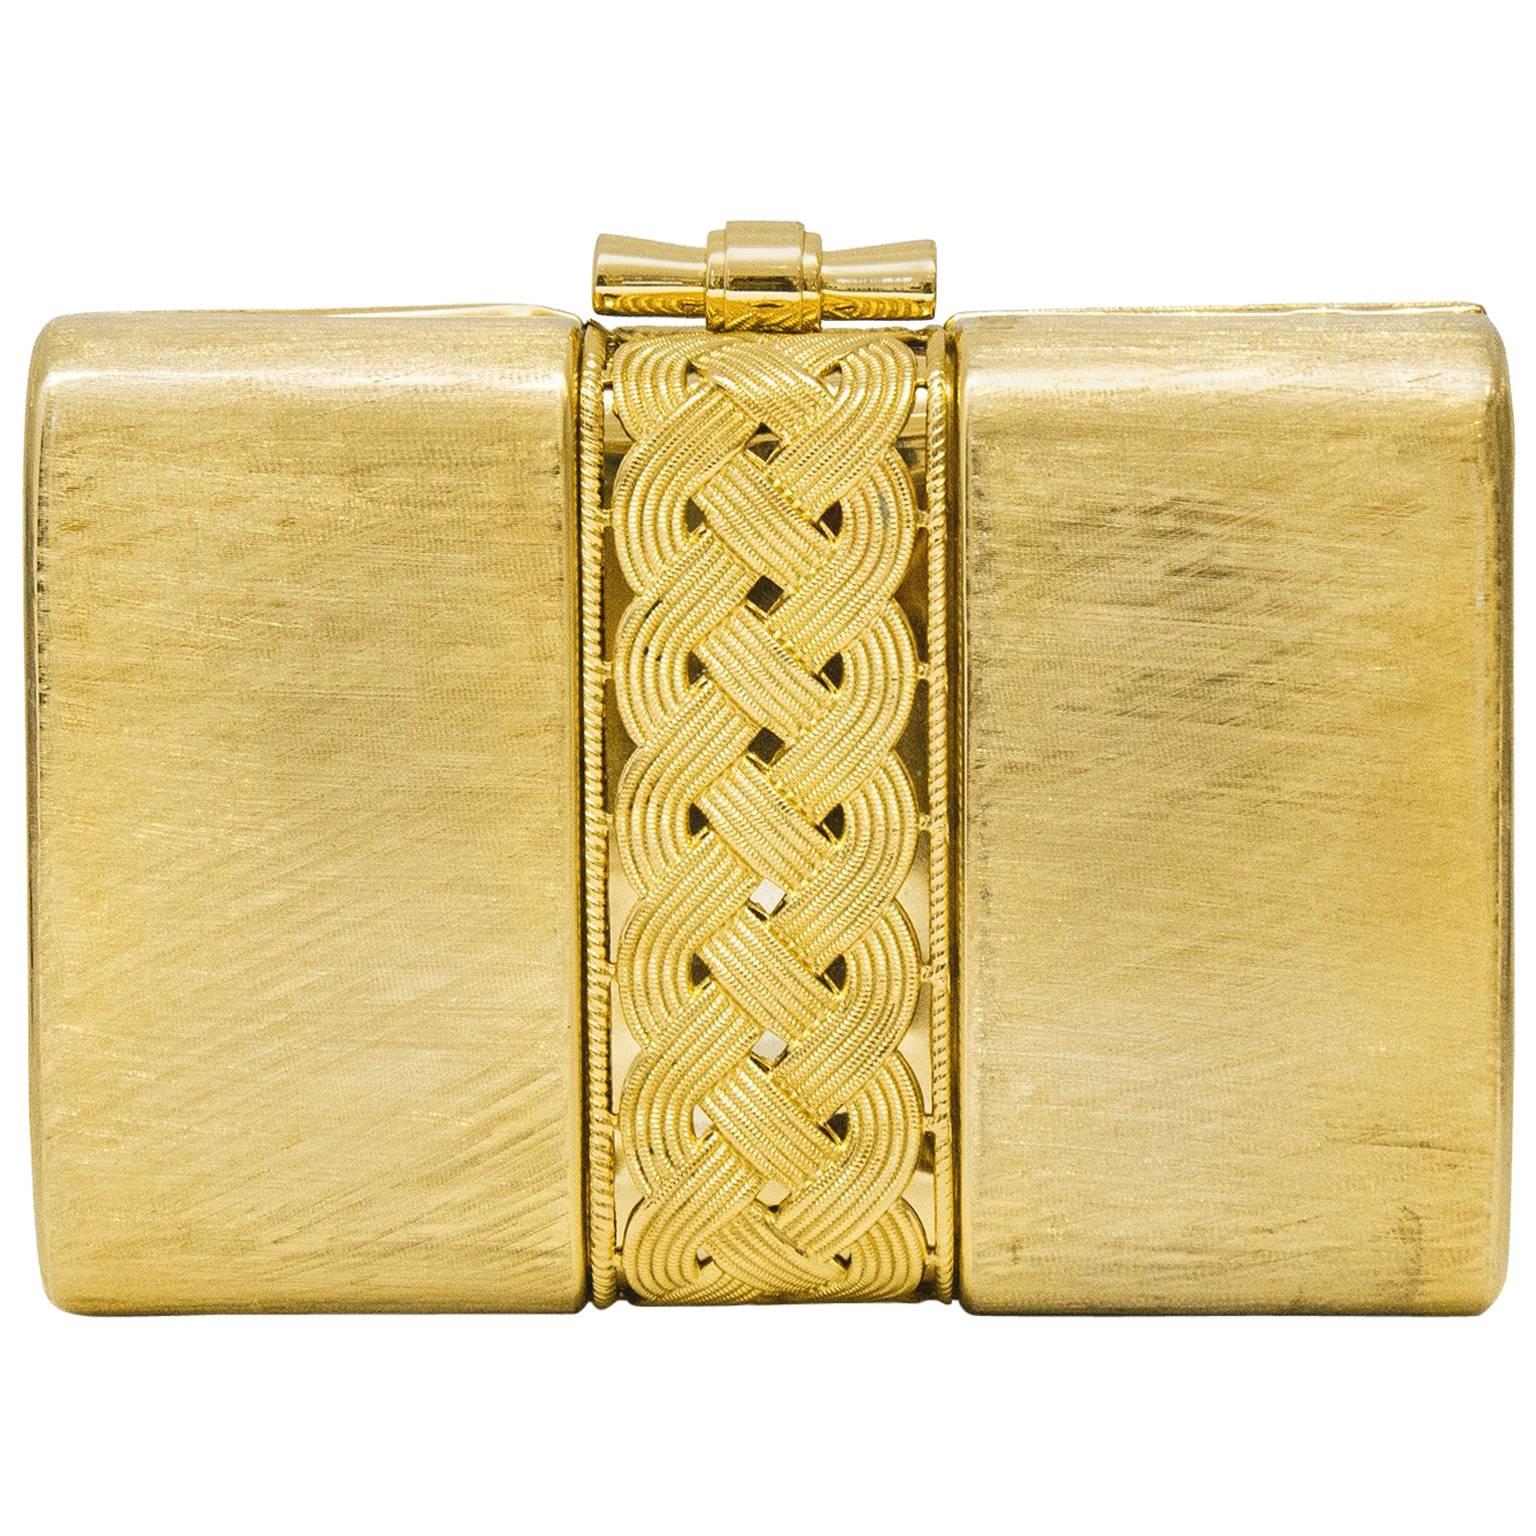 1980's Rodo Gold Hard Clutch with Braided Detail